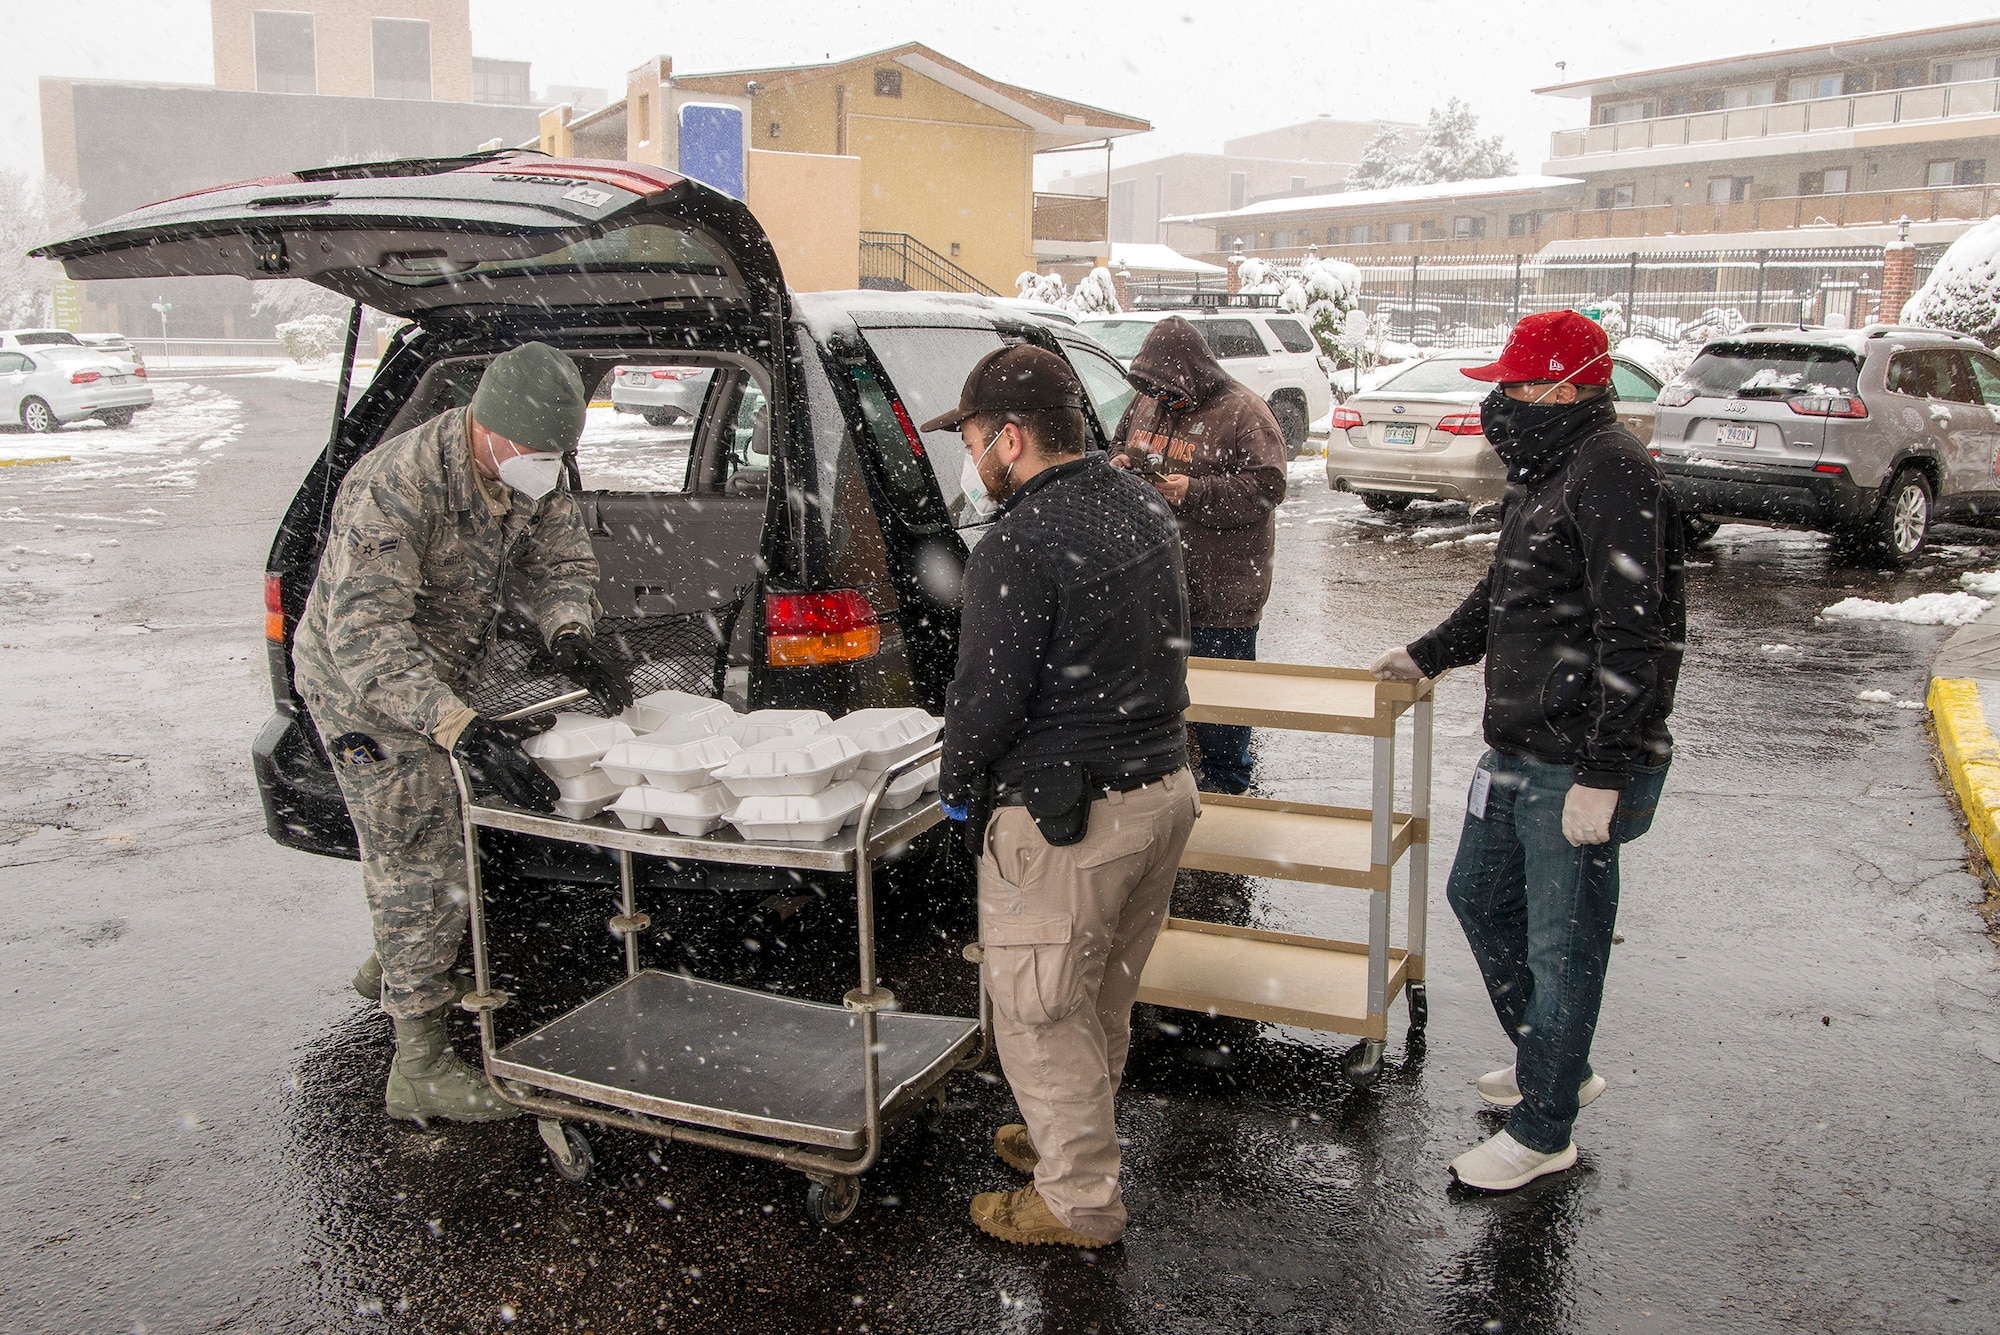 U.S. Air Force Airman 1st Class John Boyle, 233rd Space Group security forces specialist, Colorado Air National Guard, Greeley, gathers meals for people experiencing homelessness as a result of COVID-19 at a hotel in Denver, April 16, 2020.